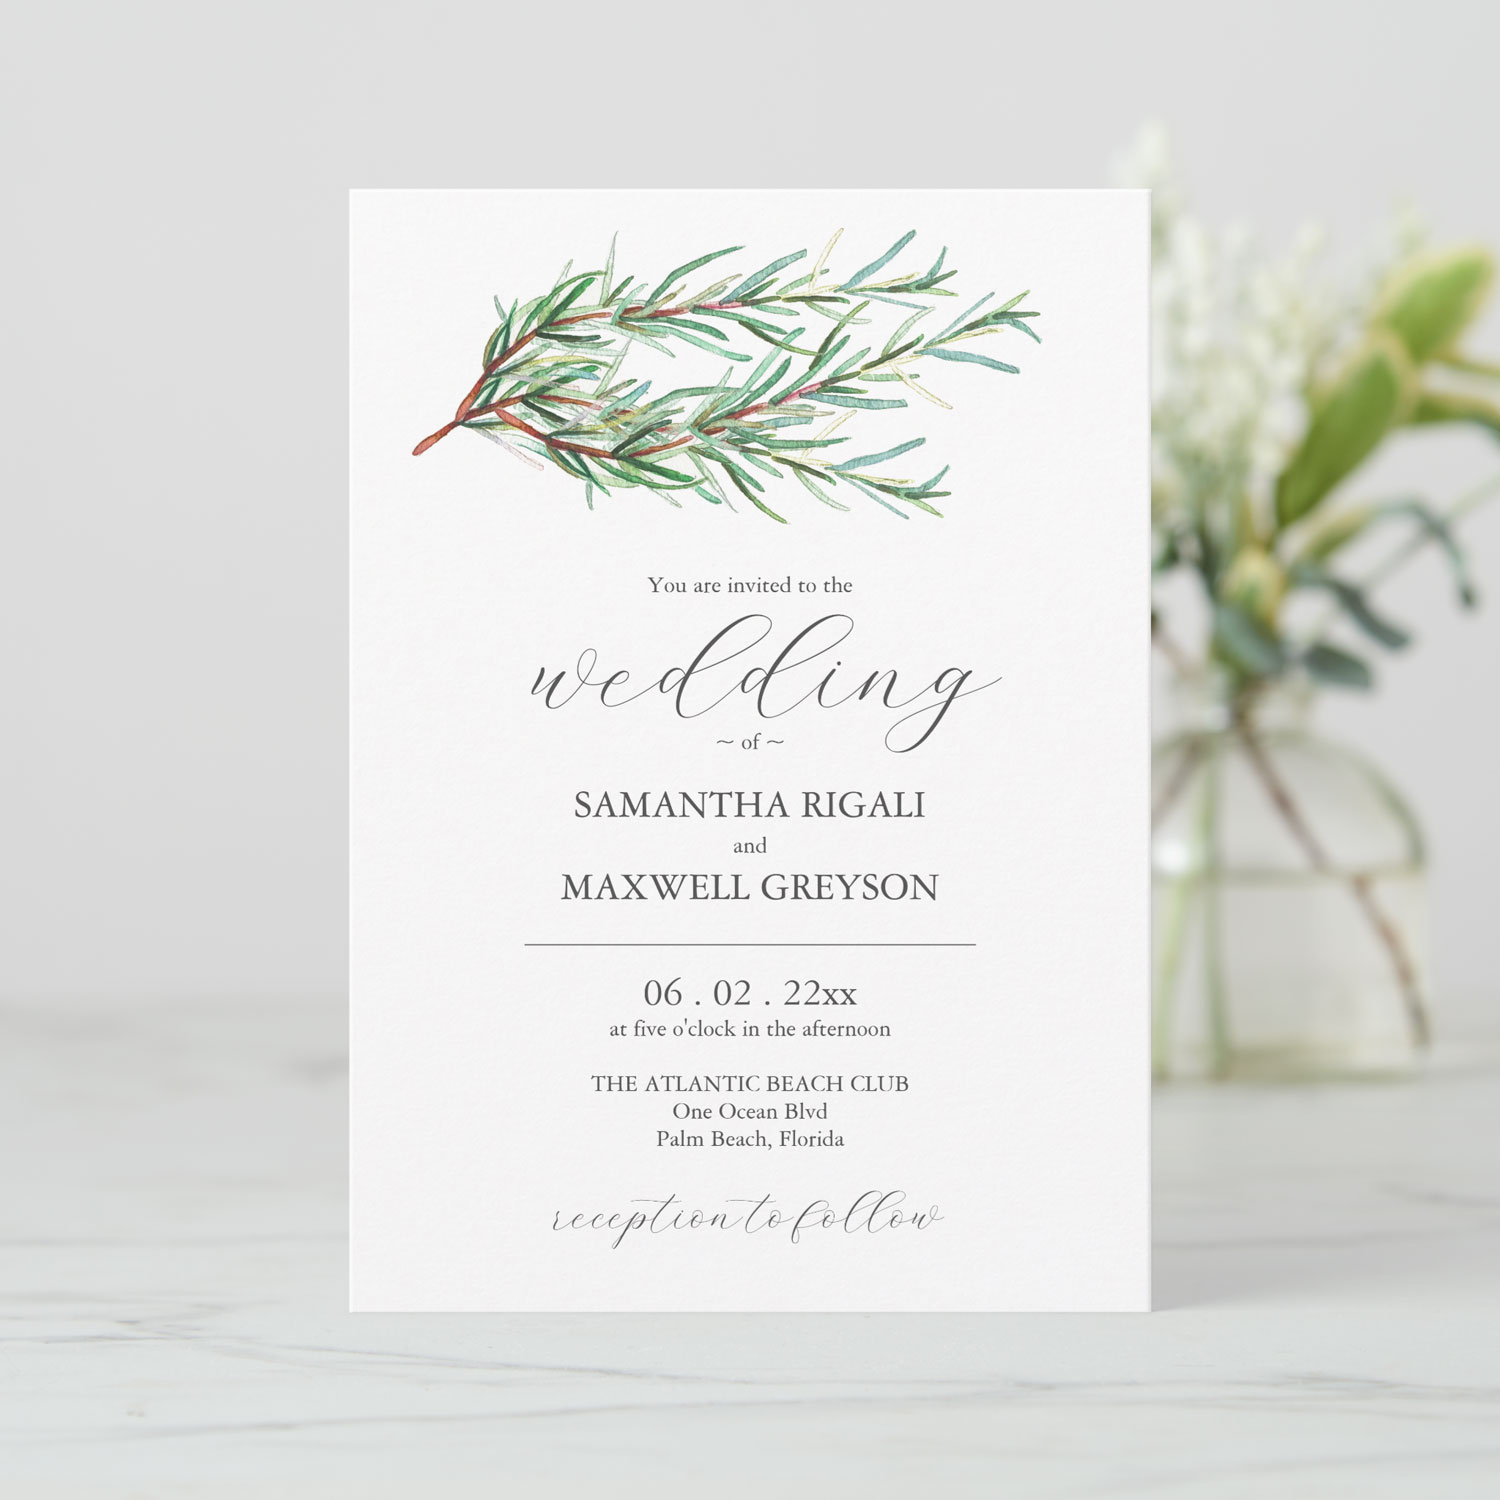 Sustainable wedding invitation ideas. Click on the image to shop this printable wedding invitation.